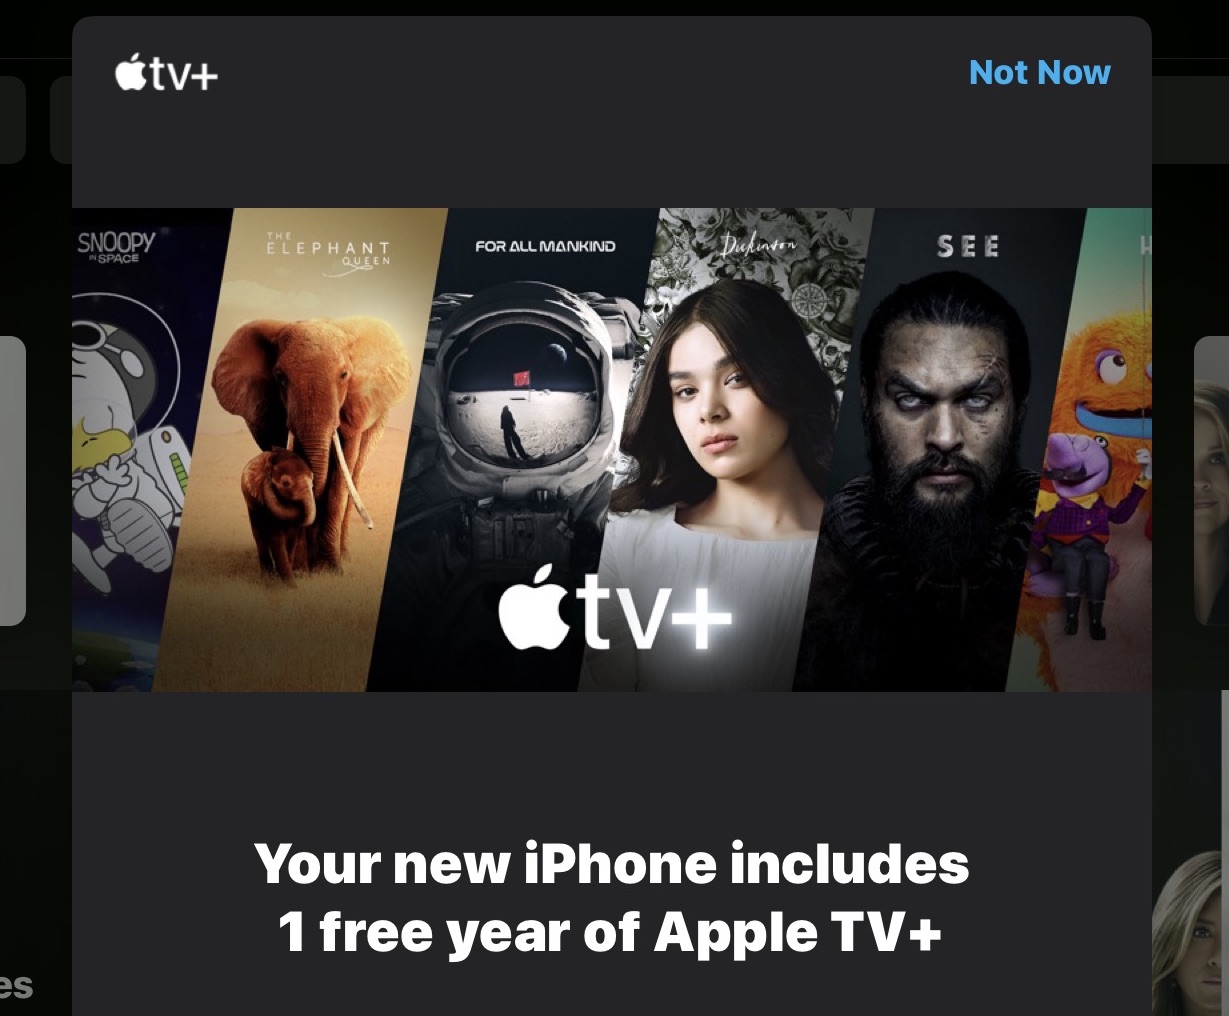 How to Sign Up for Free Apple TV+ Subscription for 1 Year